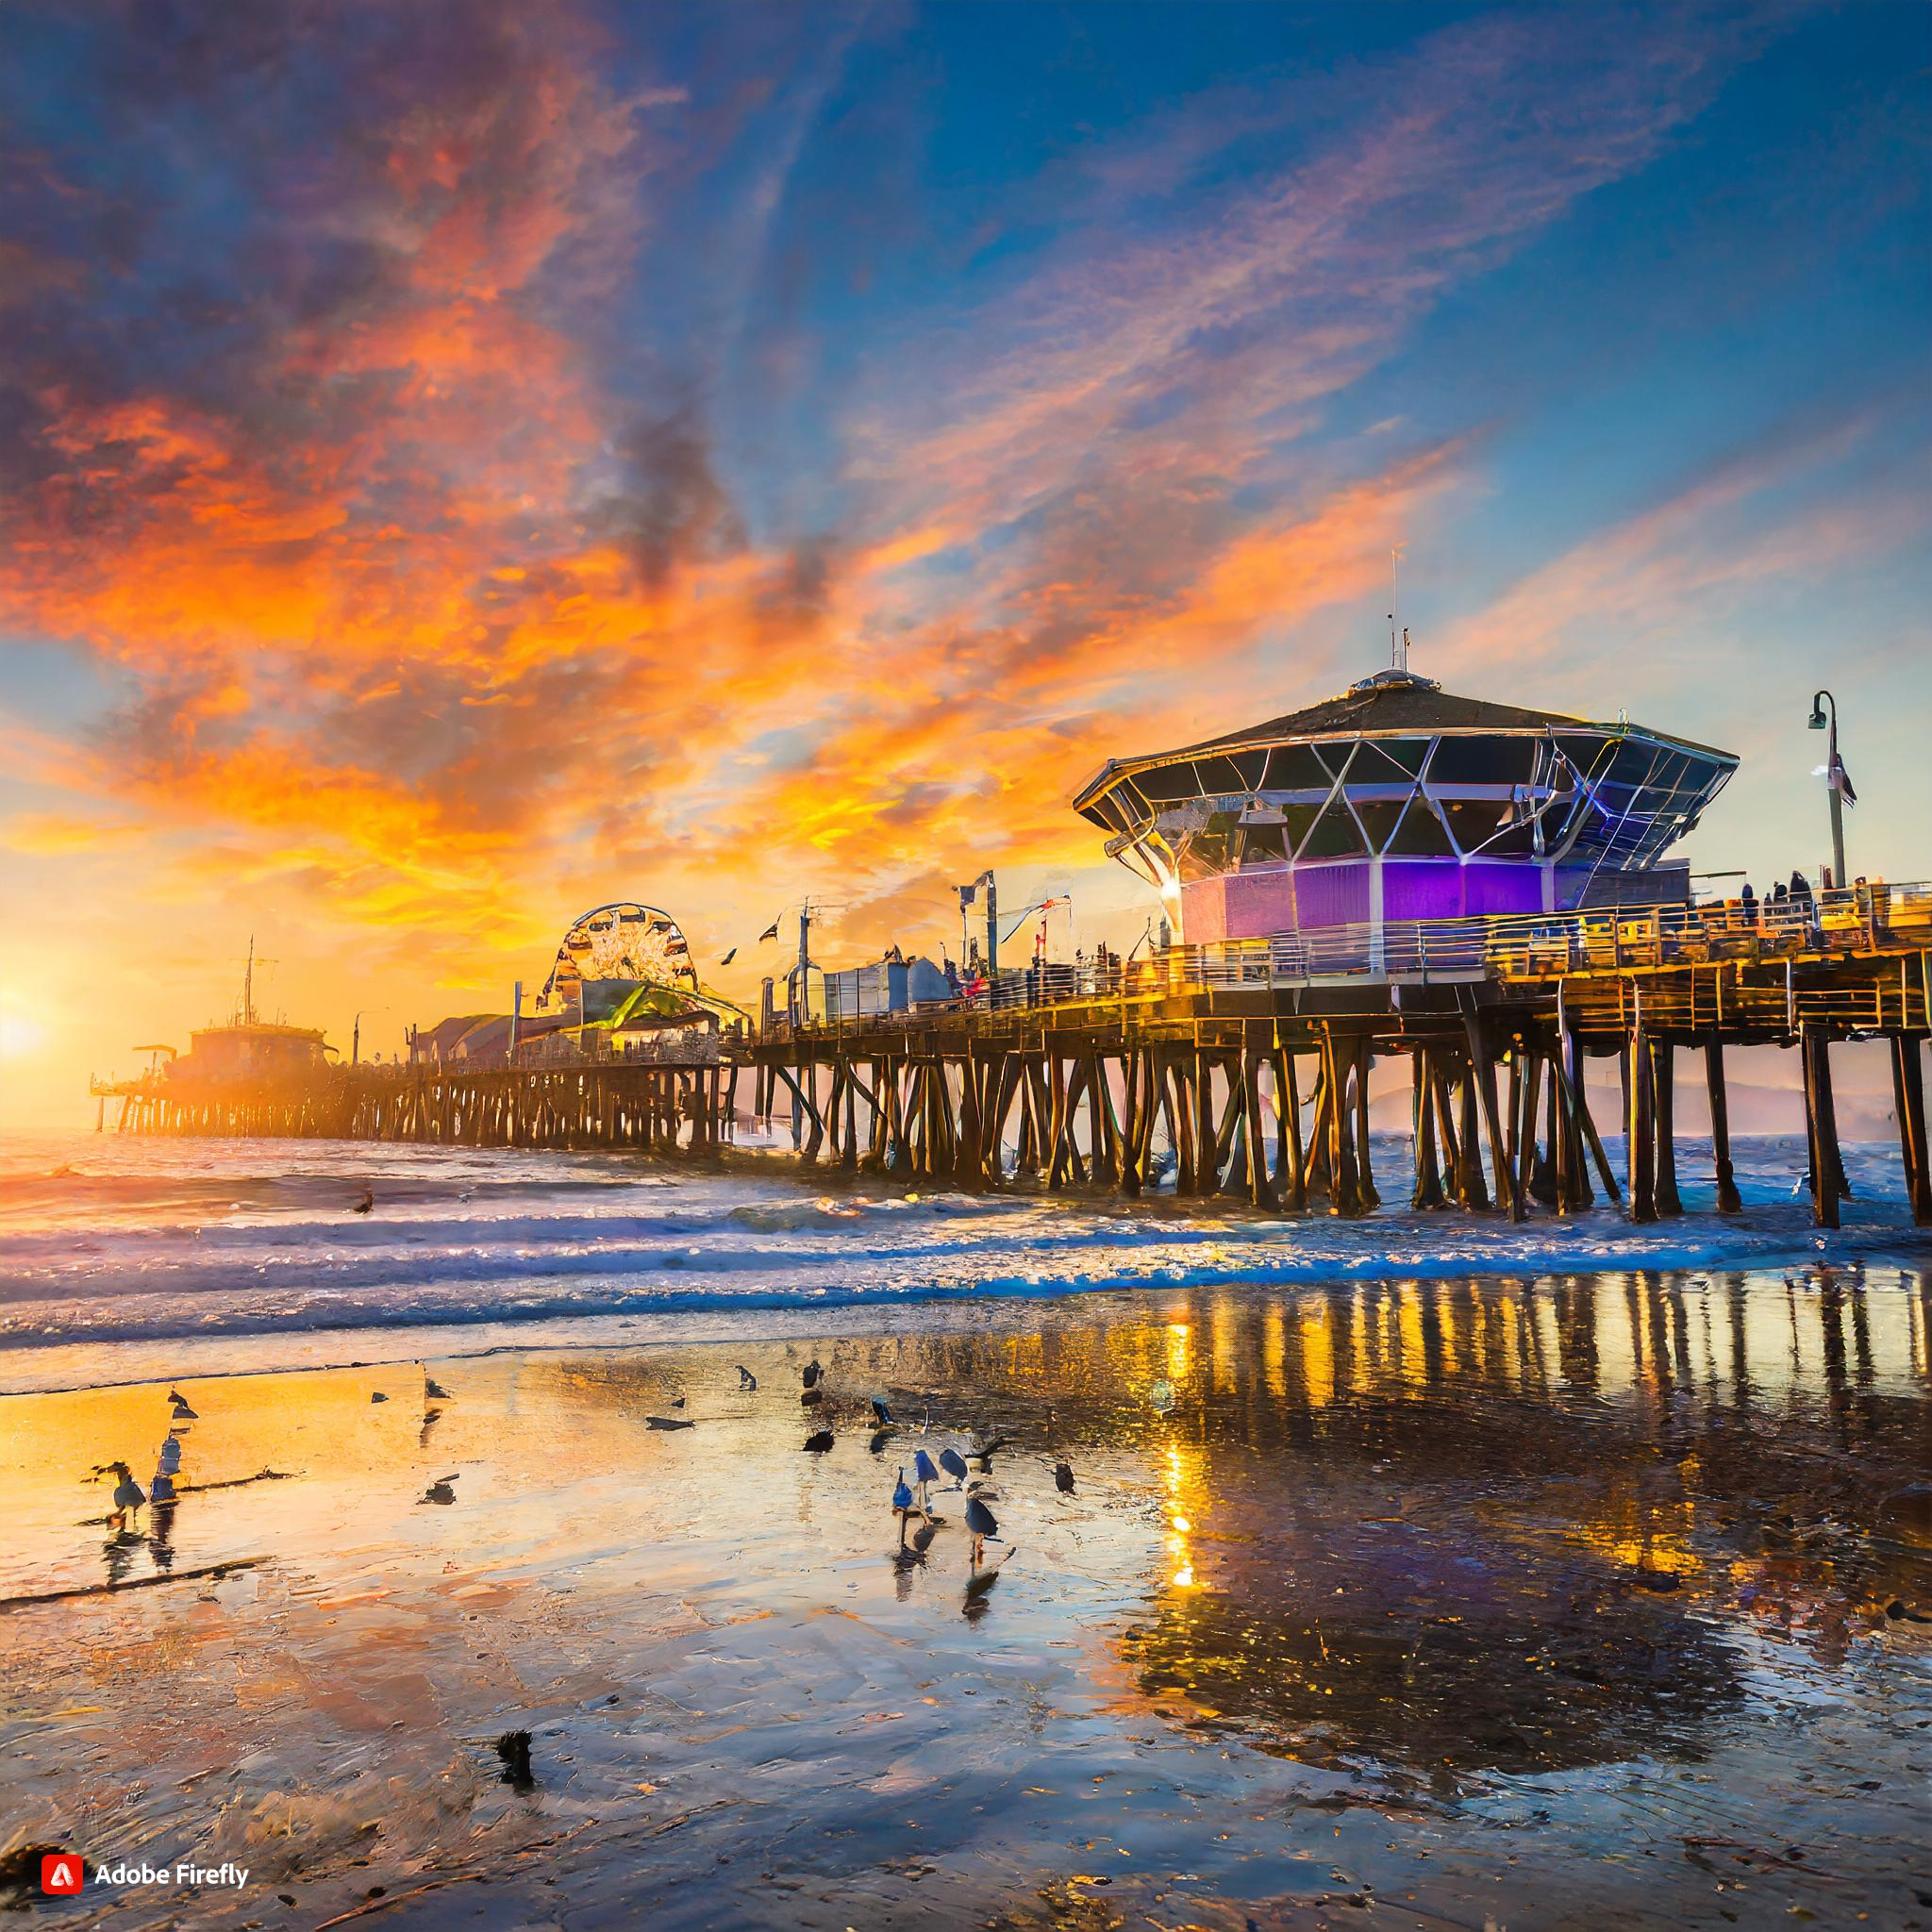 Firefly santa monica pier in LA with colorful sunset.jpg